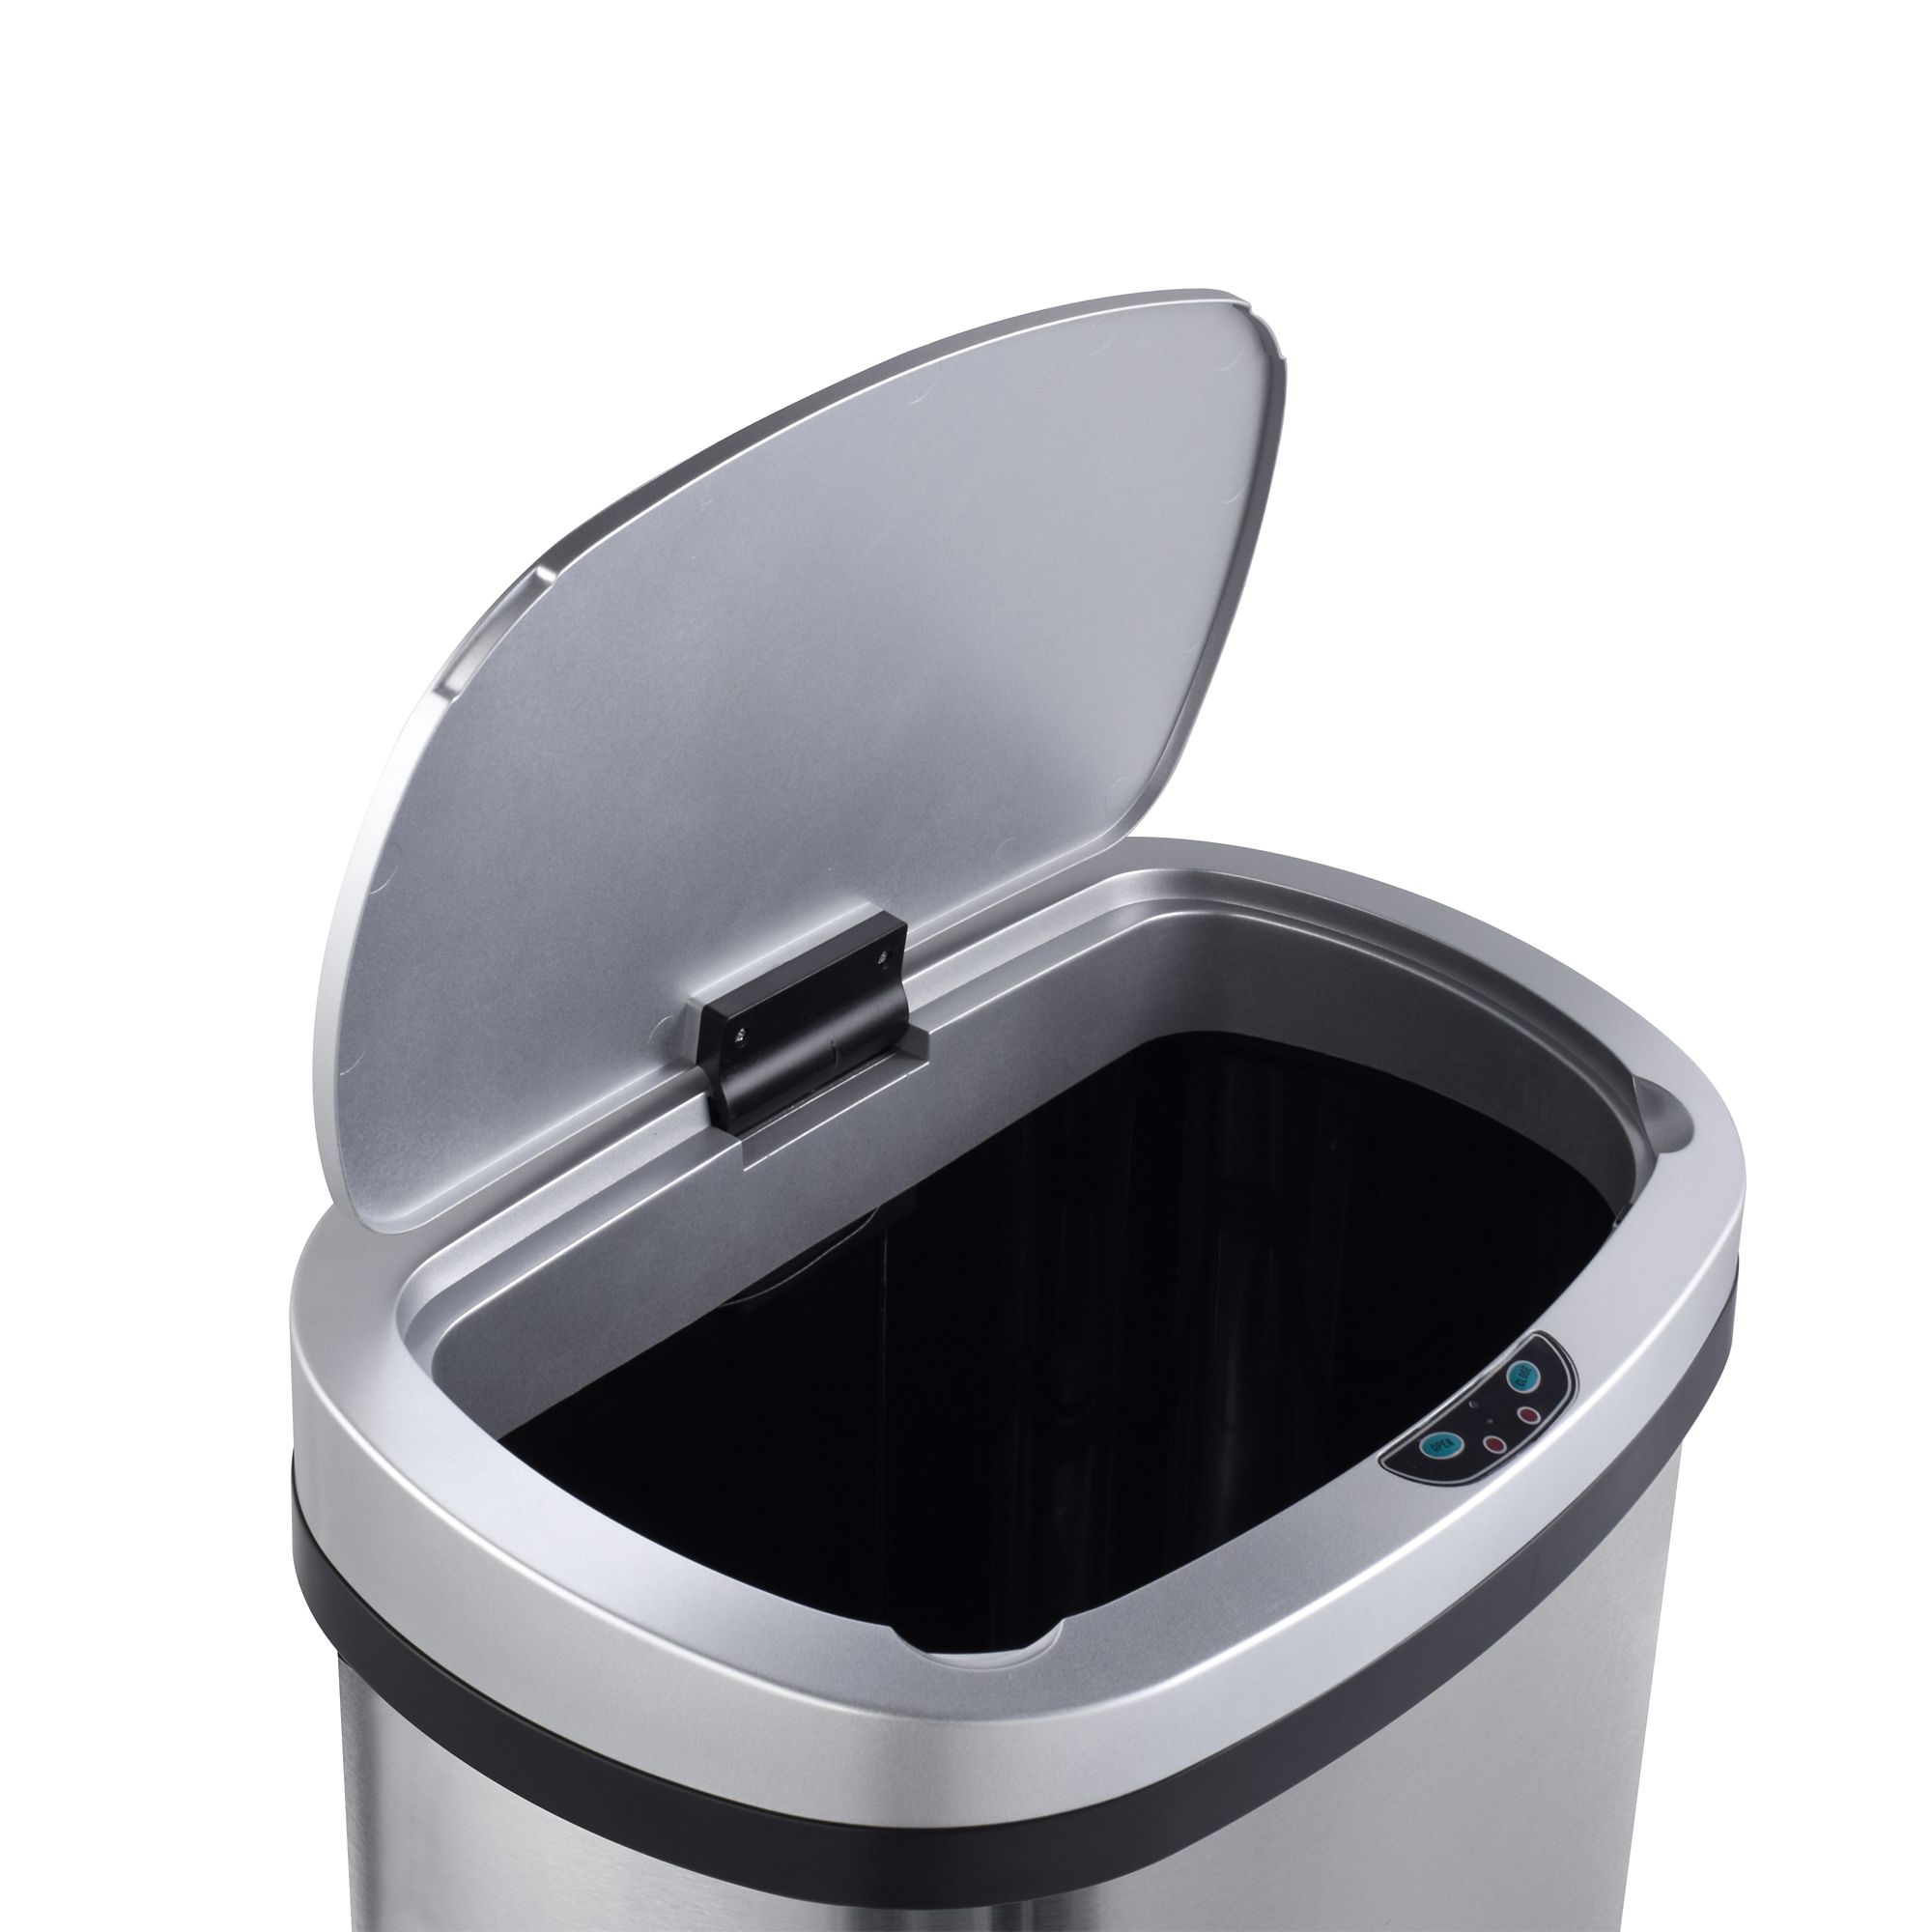 13 Gallon Stainless Steel Trash Can, Kitchen Garbage Can with Lid